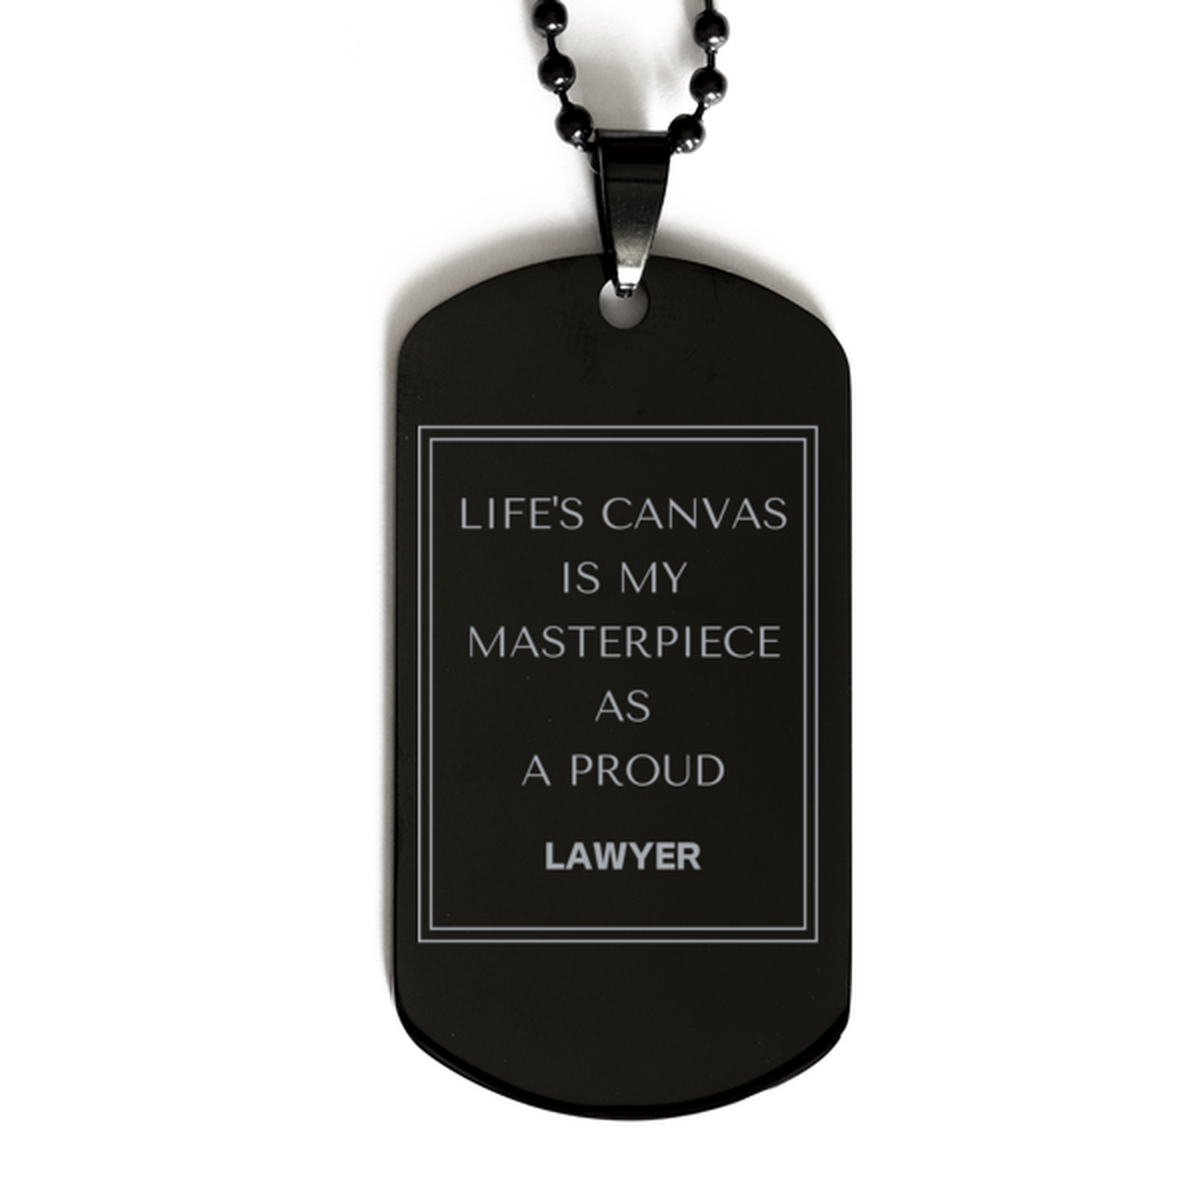 Proud Lawyer Gifts, Life's canvas is my masterpiece, Epic Birthday Christmas Unique Black Dog Tag For Lawyer, Coworkers, Men, Women, Friends